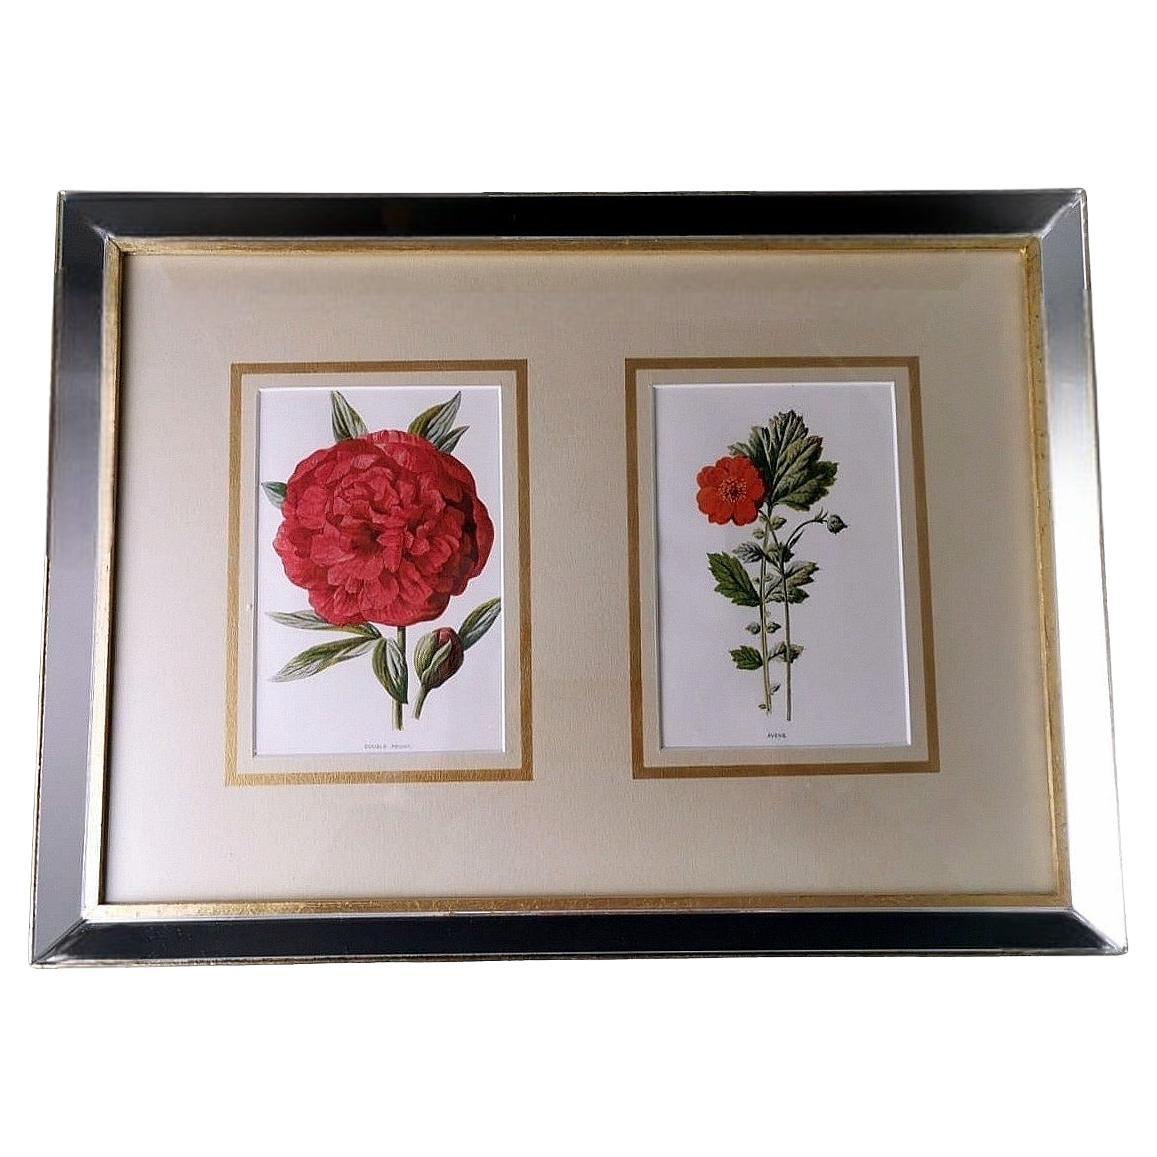 Mirror Frame With English Chromolithographic Prints With Flowers